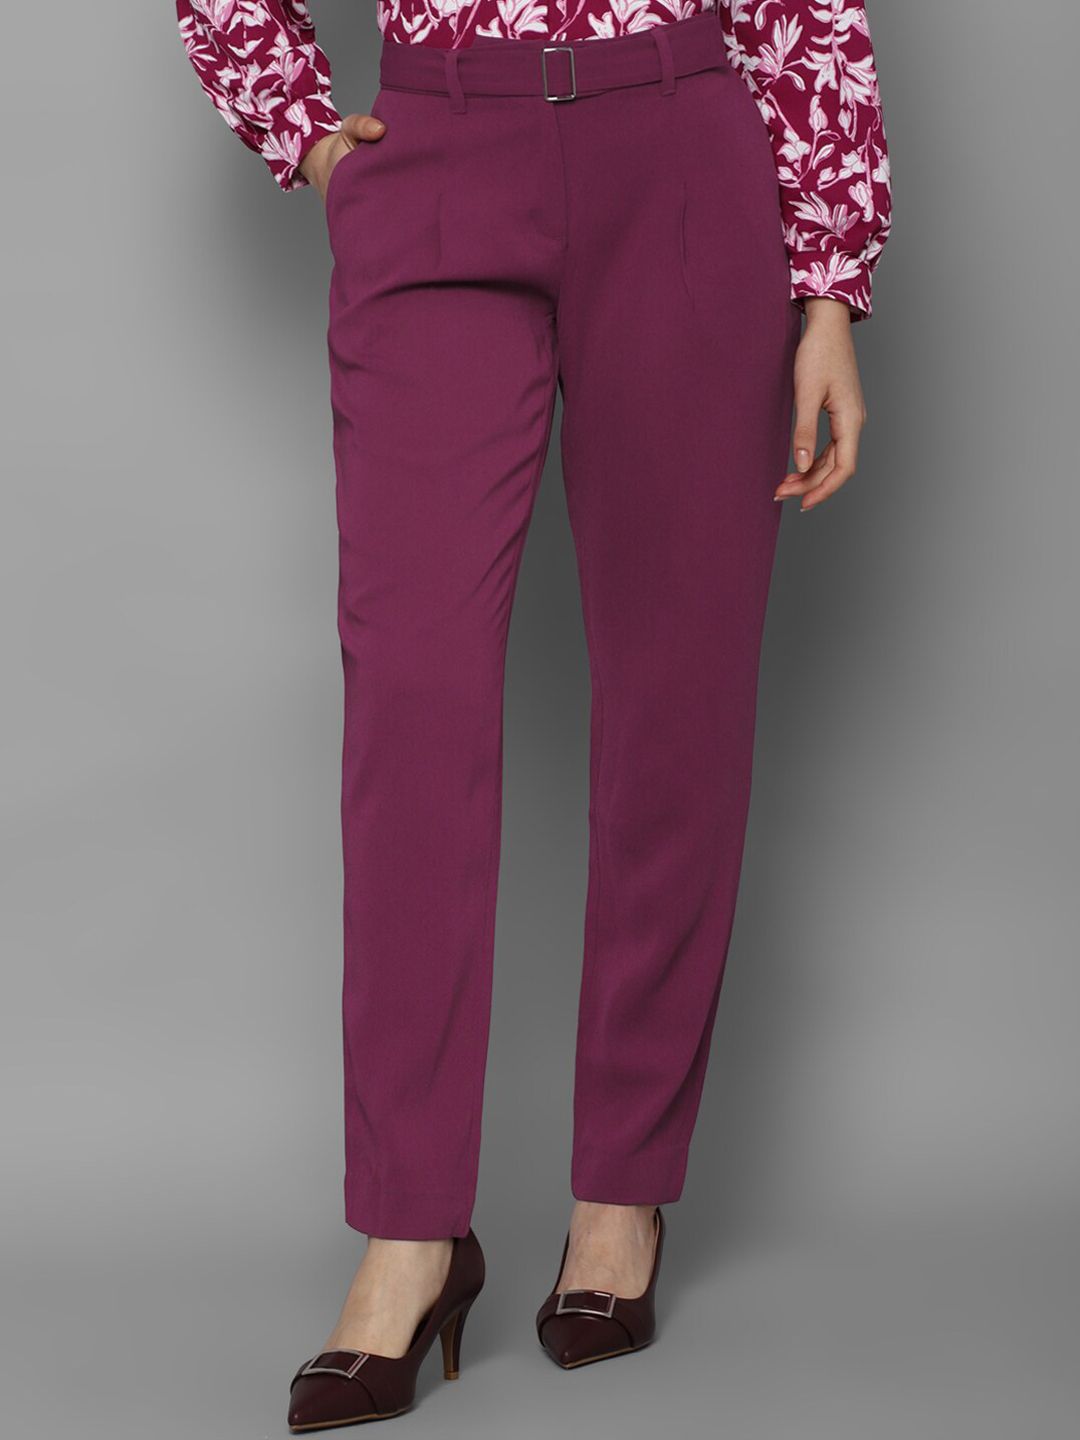 Allen Solly Woman Women Purple Pleated Trousers Price in India